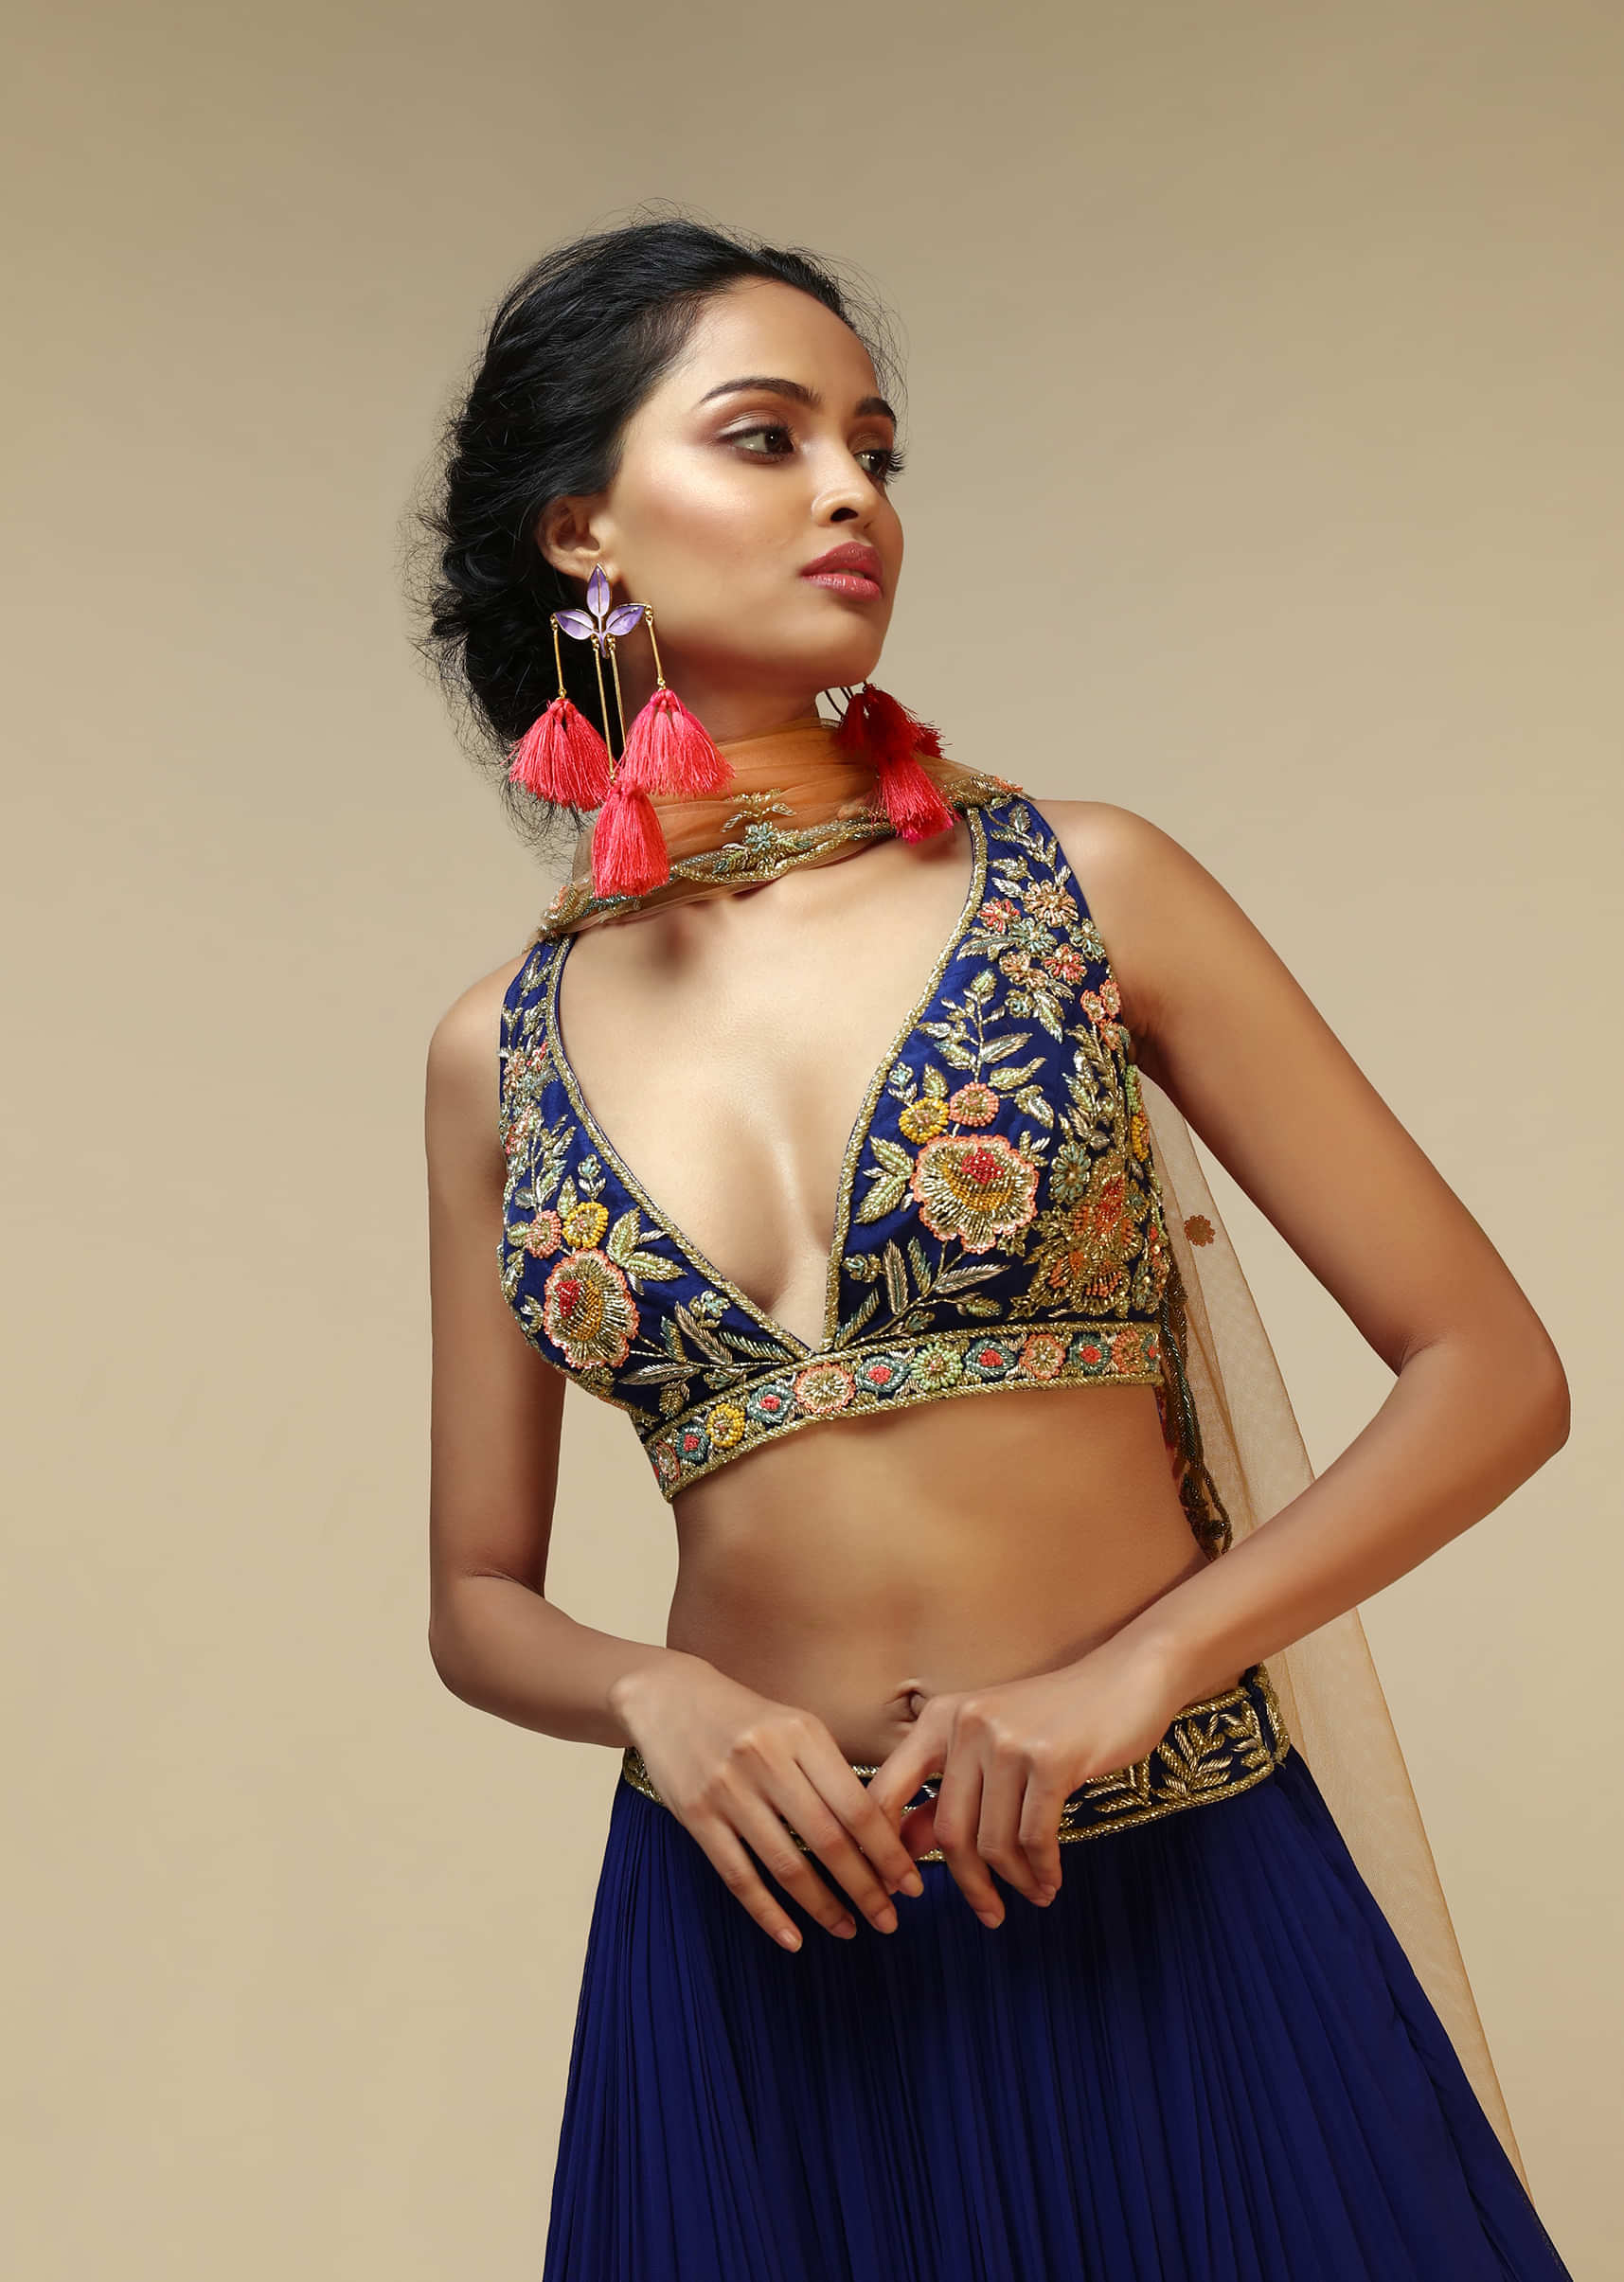 Royal Blue Lehenga Choli With Plunging Neckline And Hand Embroidered Using Multi Colored Beads And Resham 